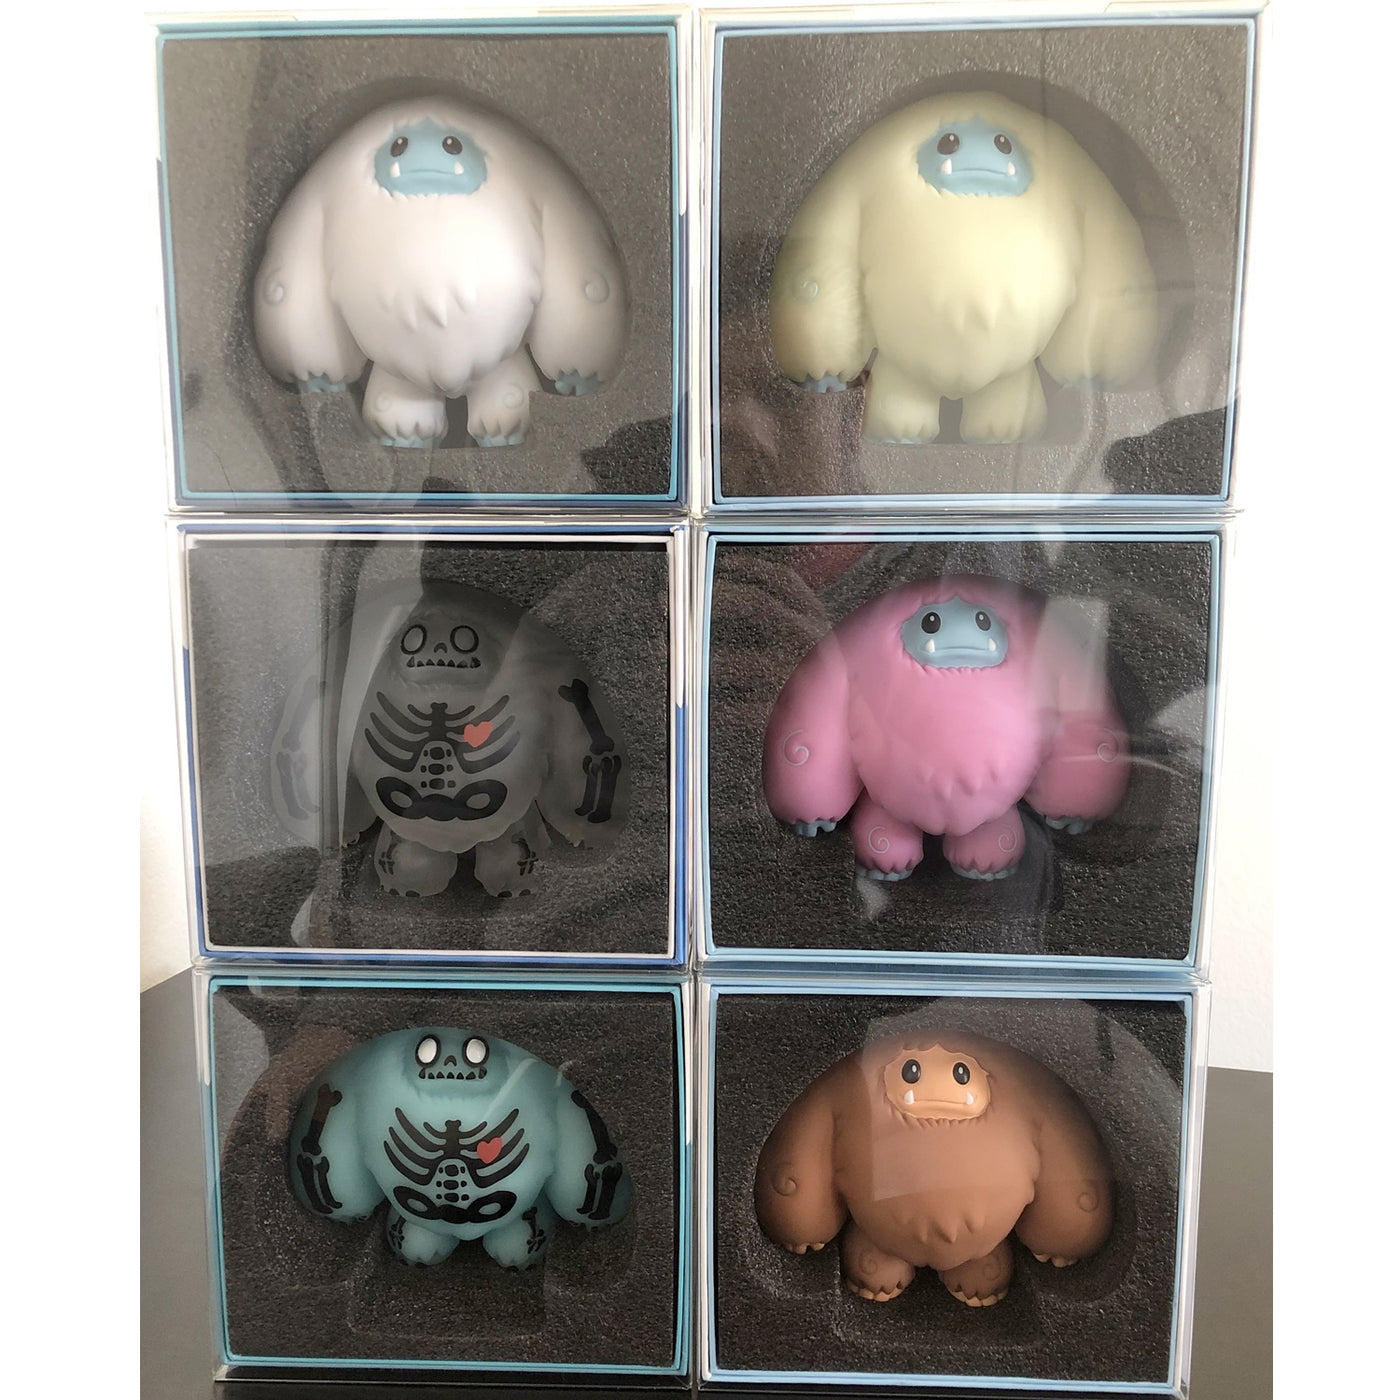 ABOMINABLE TOYS Chomp Protectors for Chomp Vinyl Collectible Figures, 50mm thick kollector protector